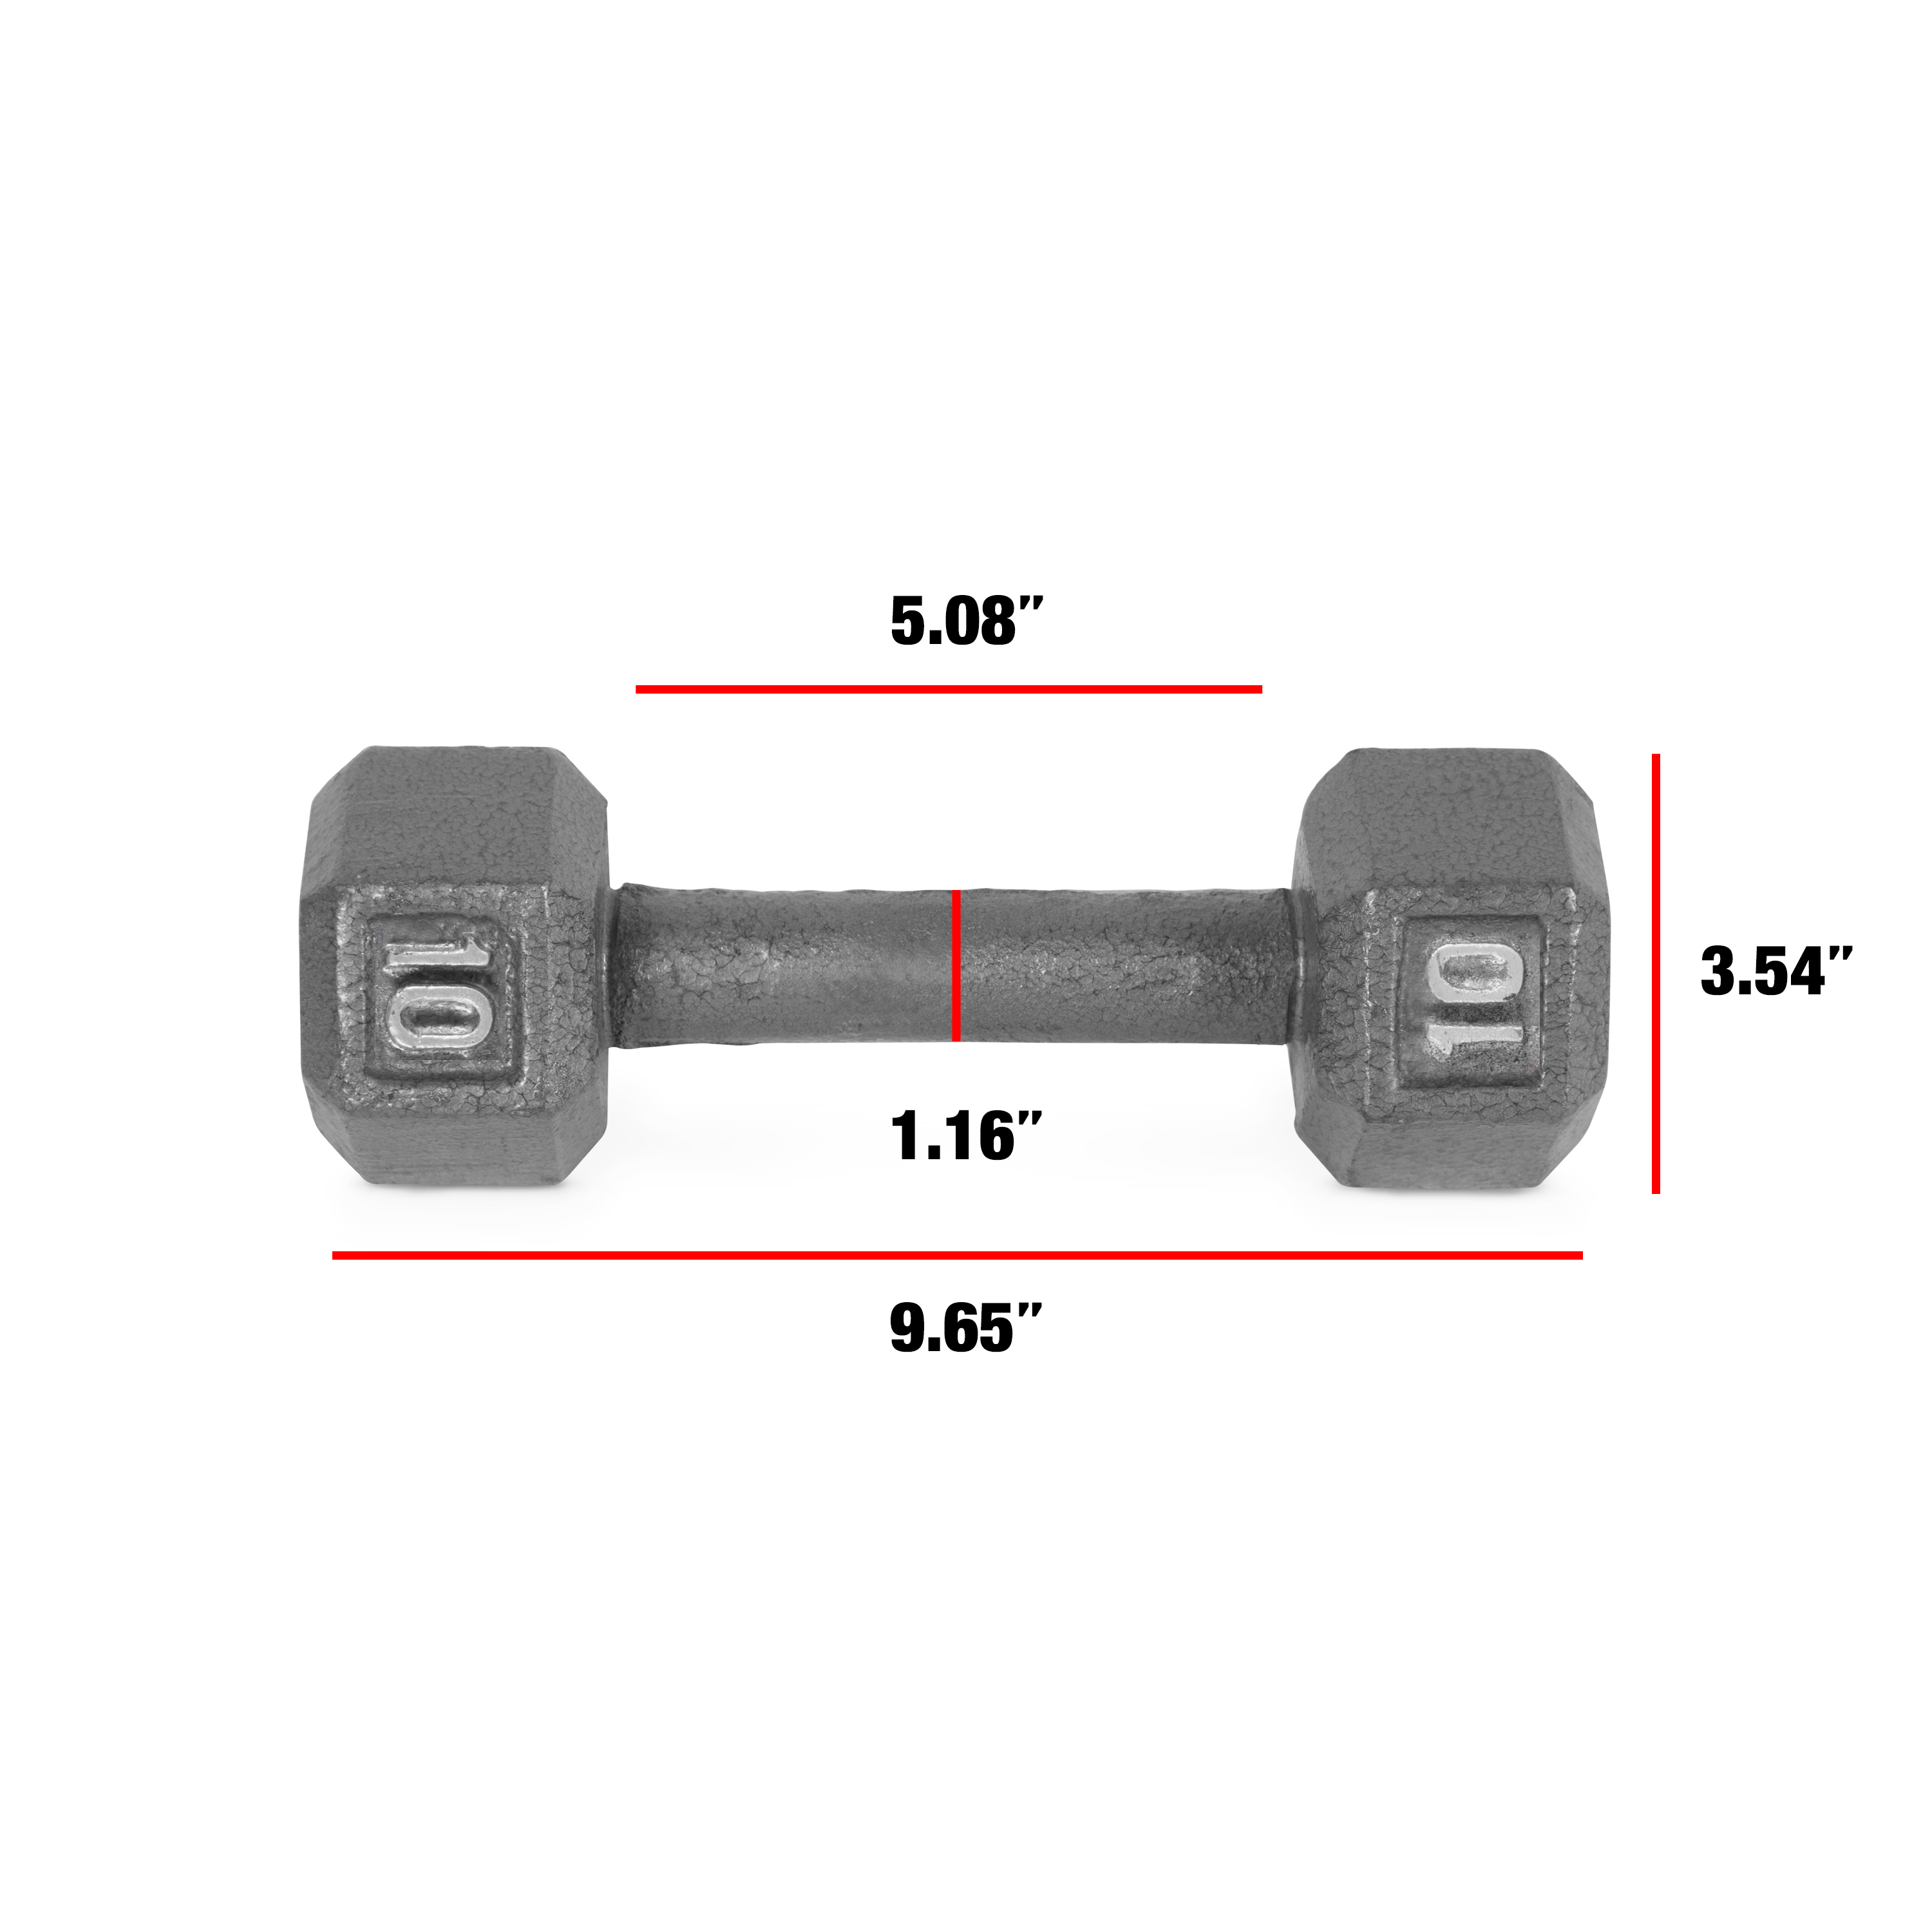 CAP Barbell 10lb Cast Iron Hex Dumbbell, Single - image 2 of 6